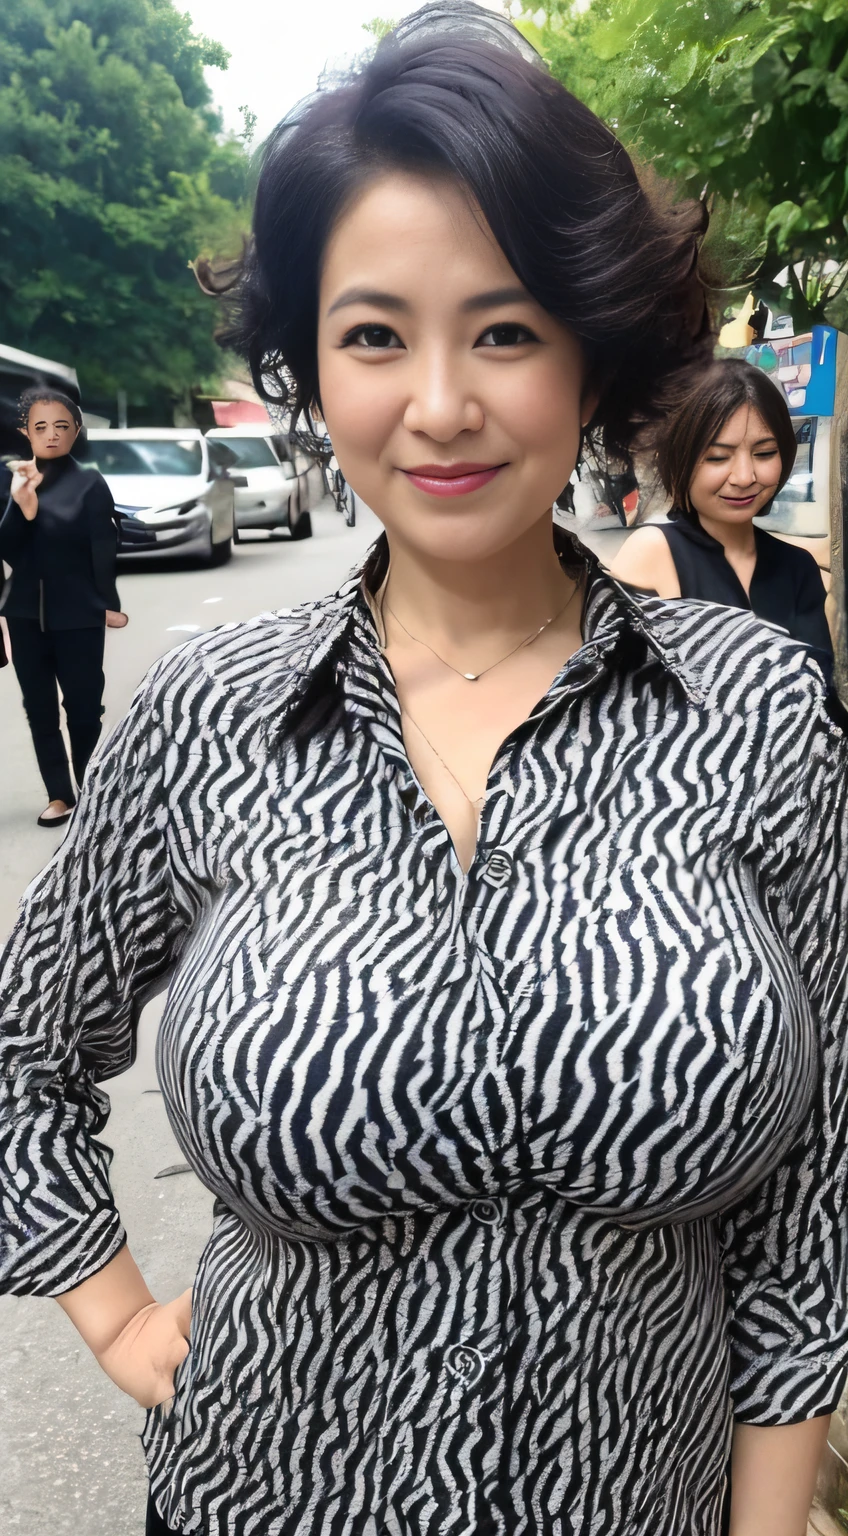 ((Best quality, 8K, Masterpiece, Portrait: 1.3)), (View viewers), Photorealism, Sharp focus, Solo, The Moro Islamic Liberation Front of Japan, Beauty,Wavy hair, Wrinkles at the corners of the eyes, to emphasize, ((Big breasts:1.3))),，30 years old, curlies, Wrinkled eyes, (Elegant black shirt, standing on your feet:1.2),（（looking at viewert））